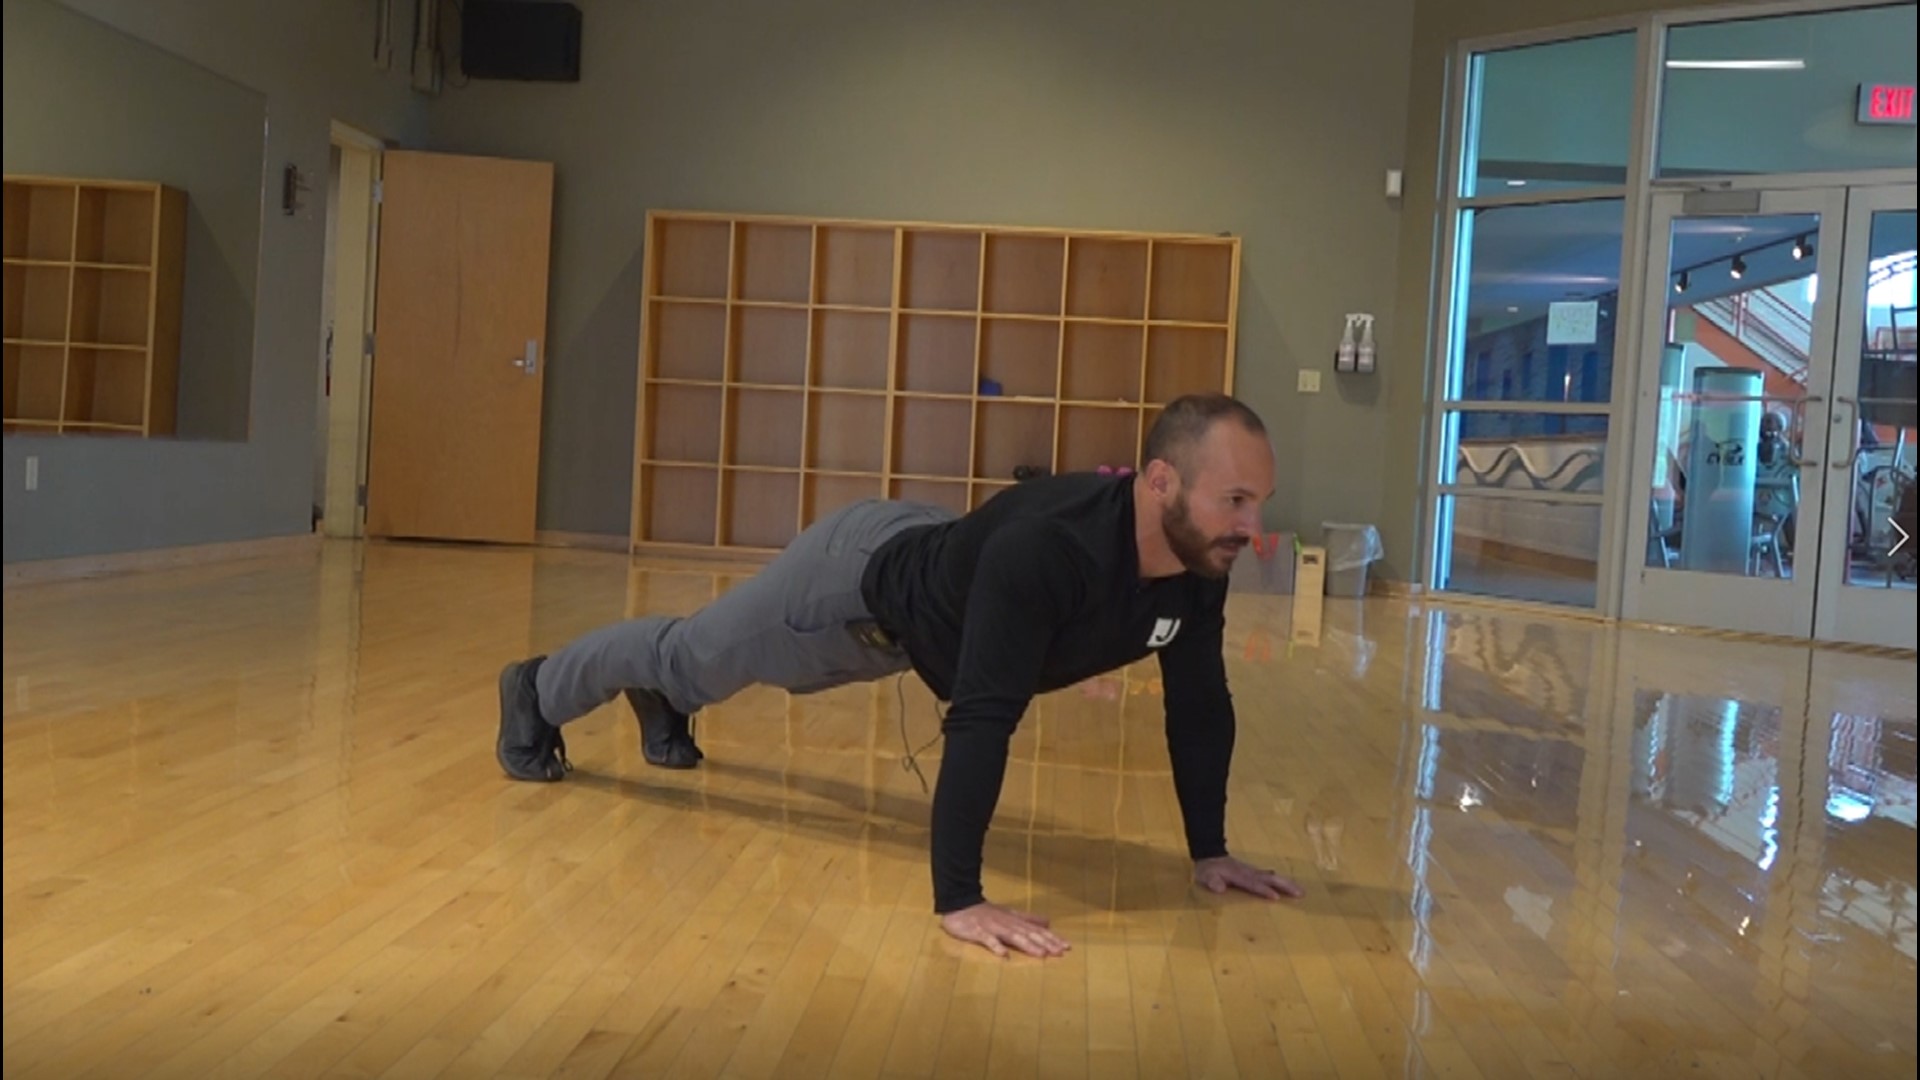 The pushup is a class workout move, and it's important to use it properly and with purpose!